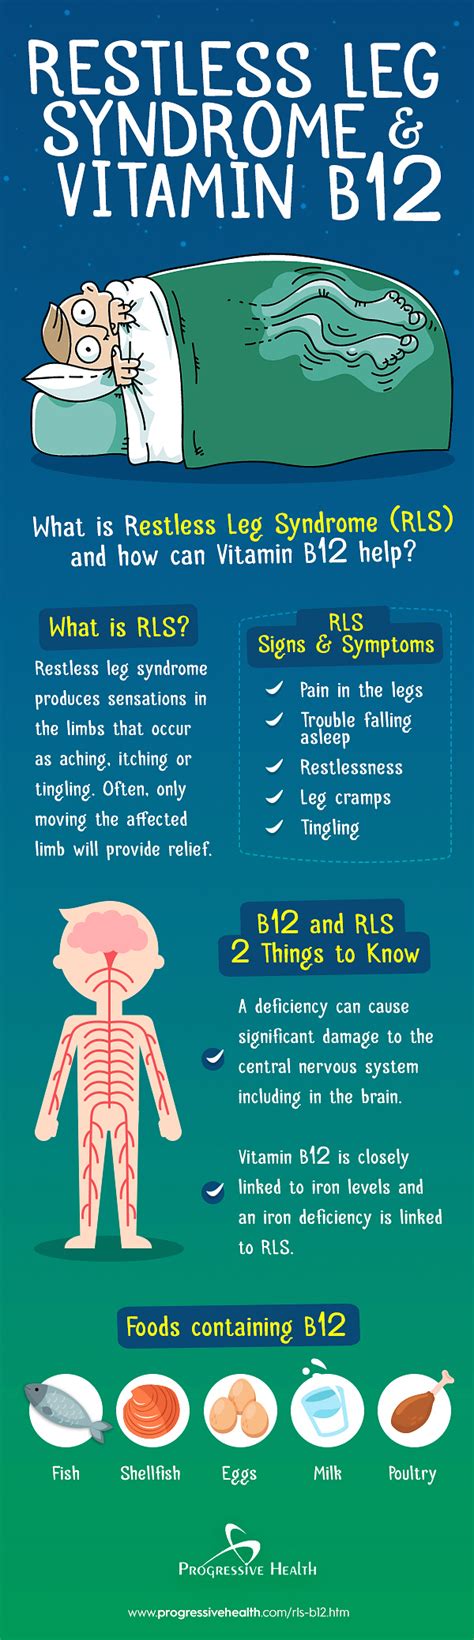 B12 And Restless Leg Syndrome